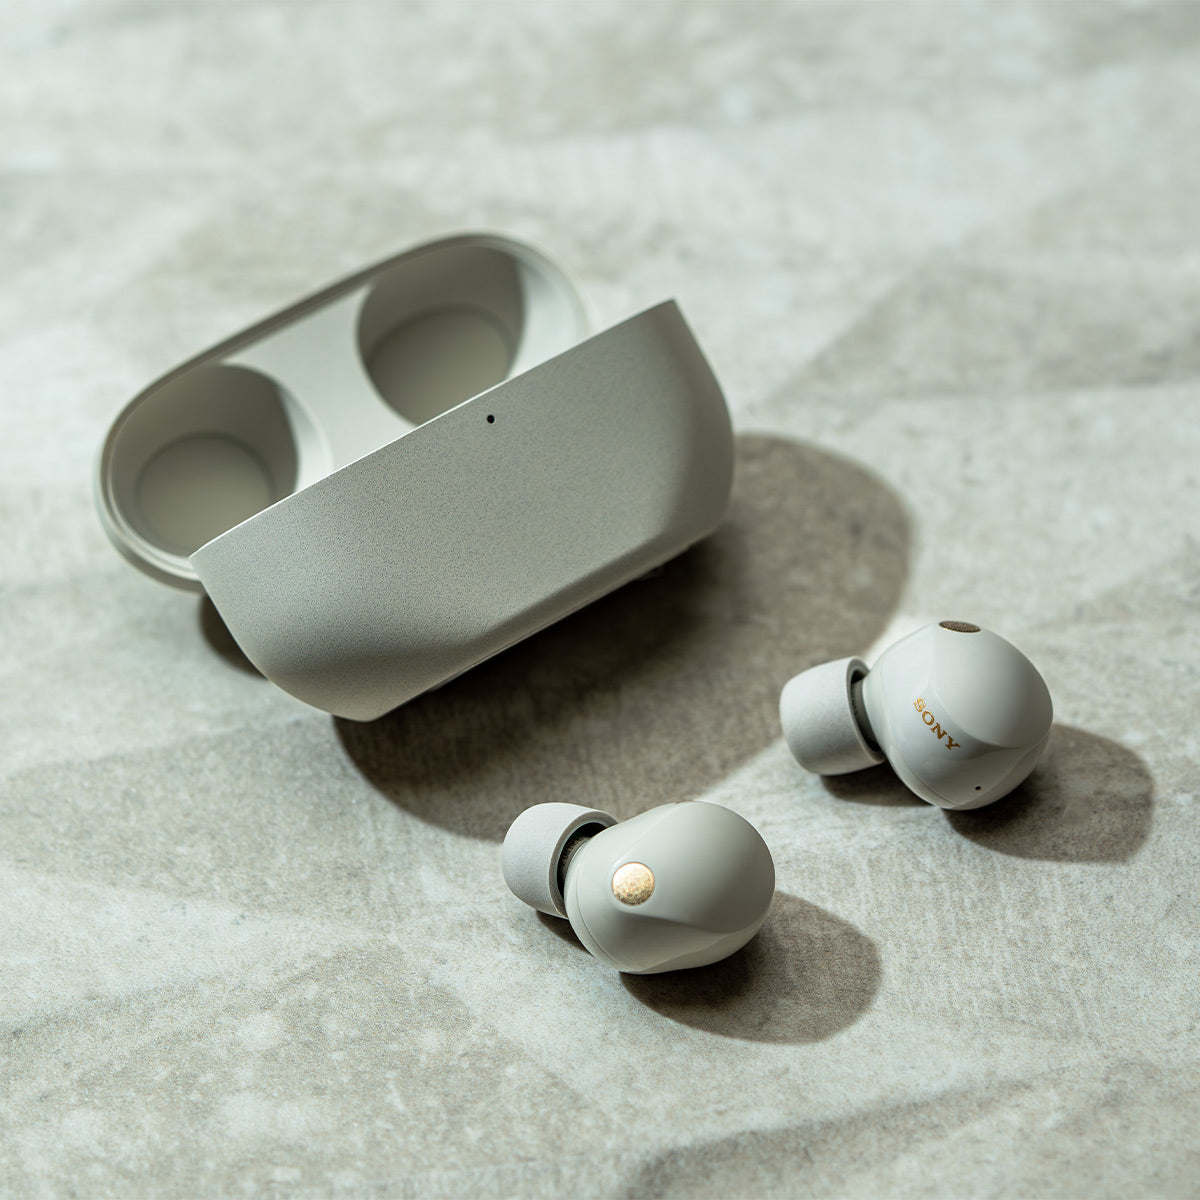 Sony Audio, Introducing the WF-1000XM5 Earbuds